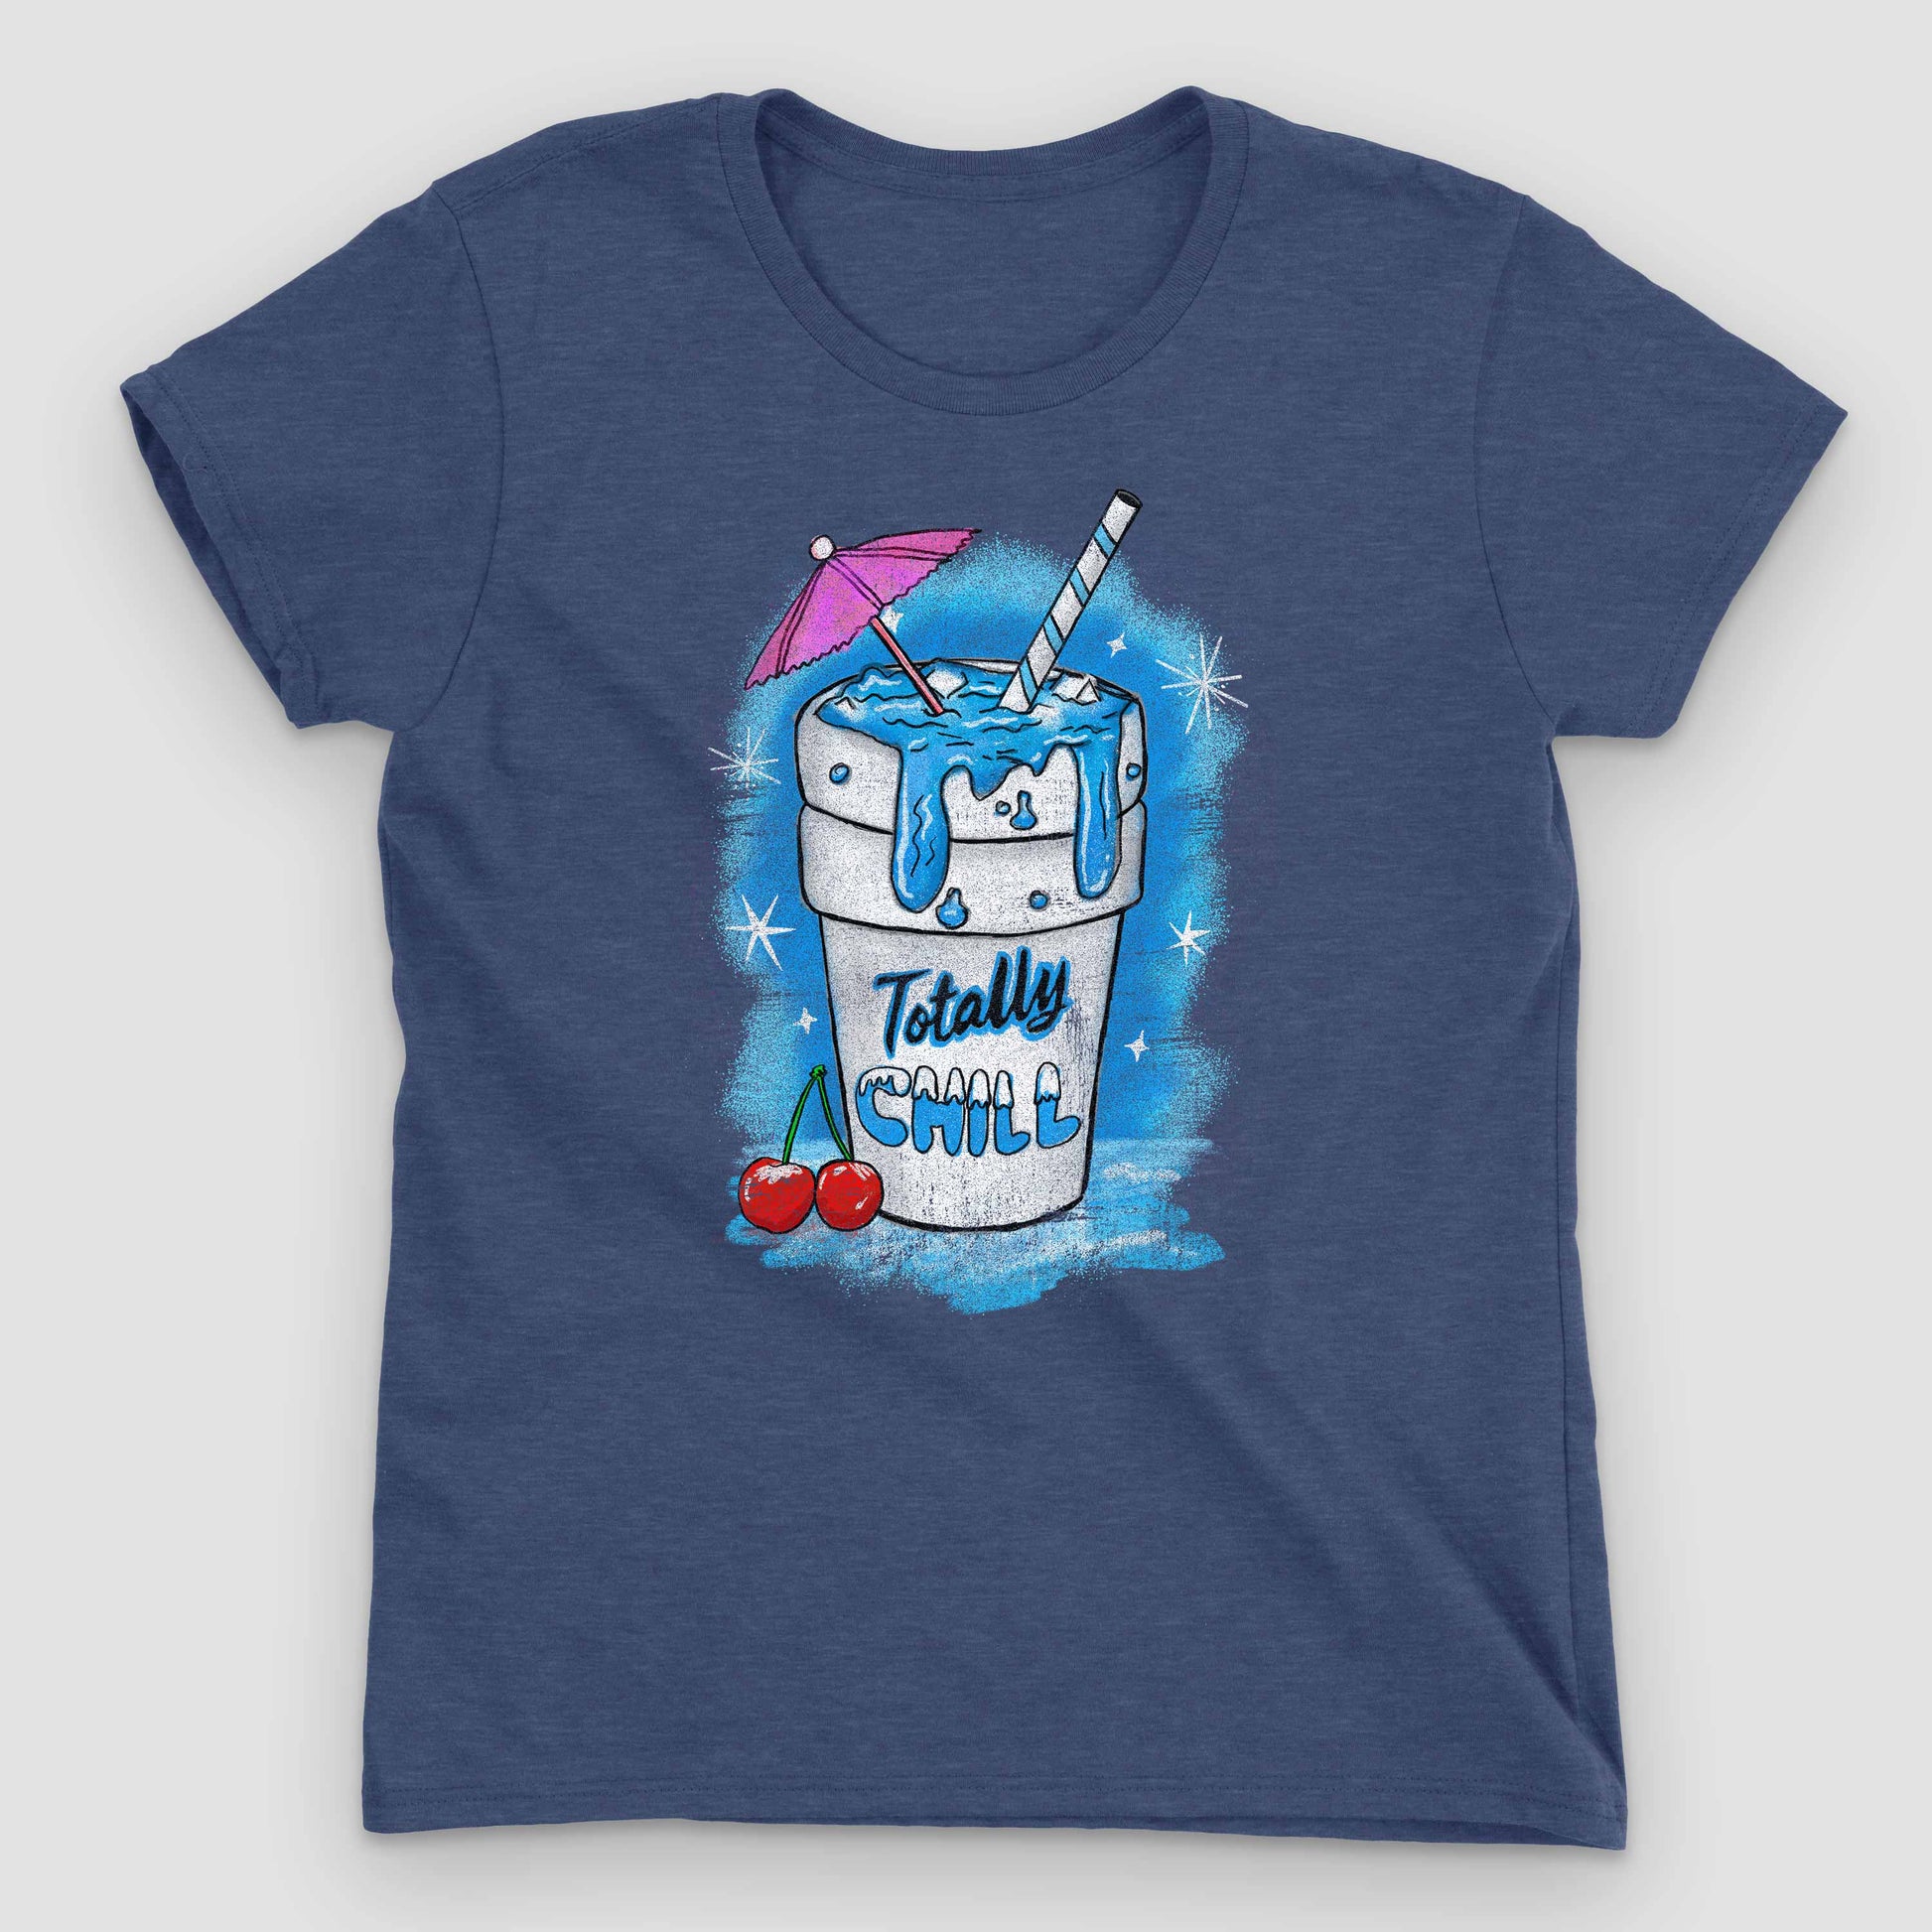 Heather Blue Totally Chill Women's Graphic T-Shirt by Snaxtime